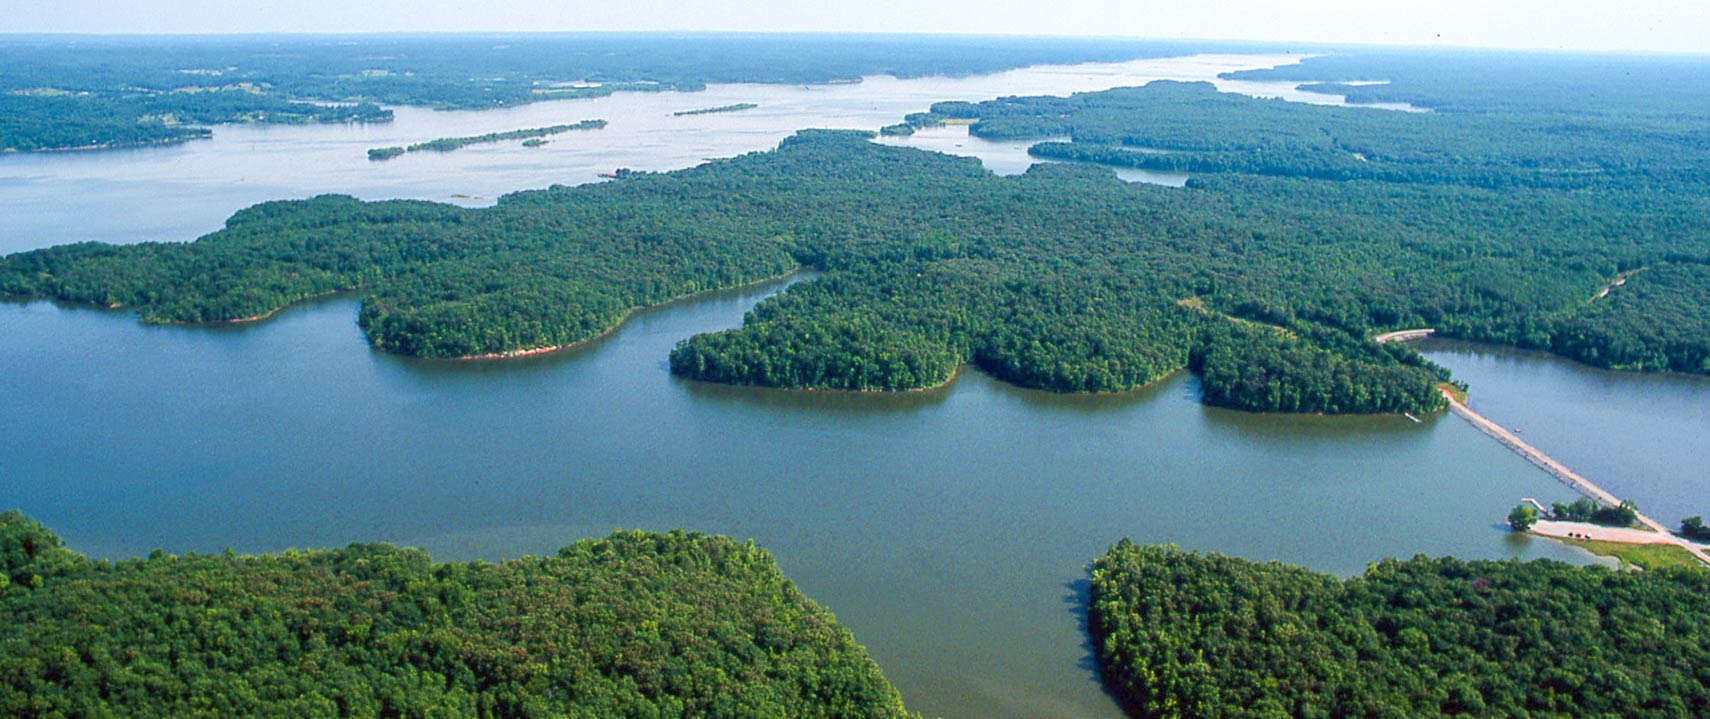 Aerial photography of the Land Between the Lakes in Kentucky